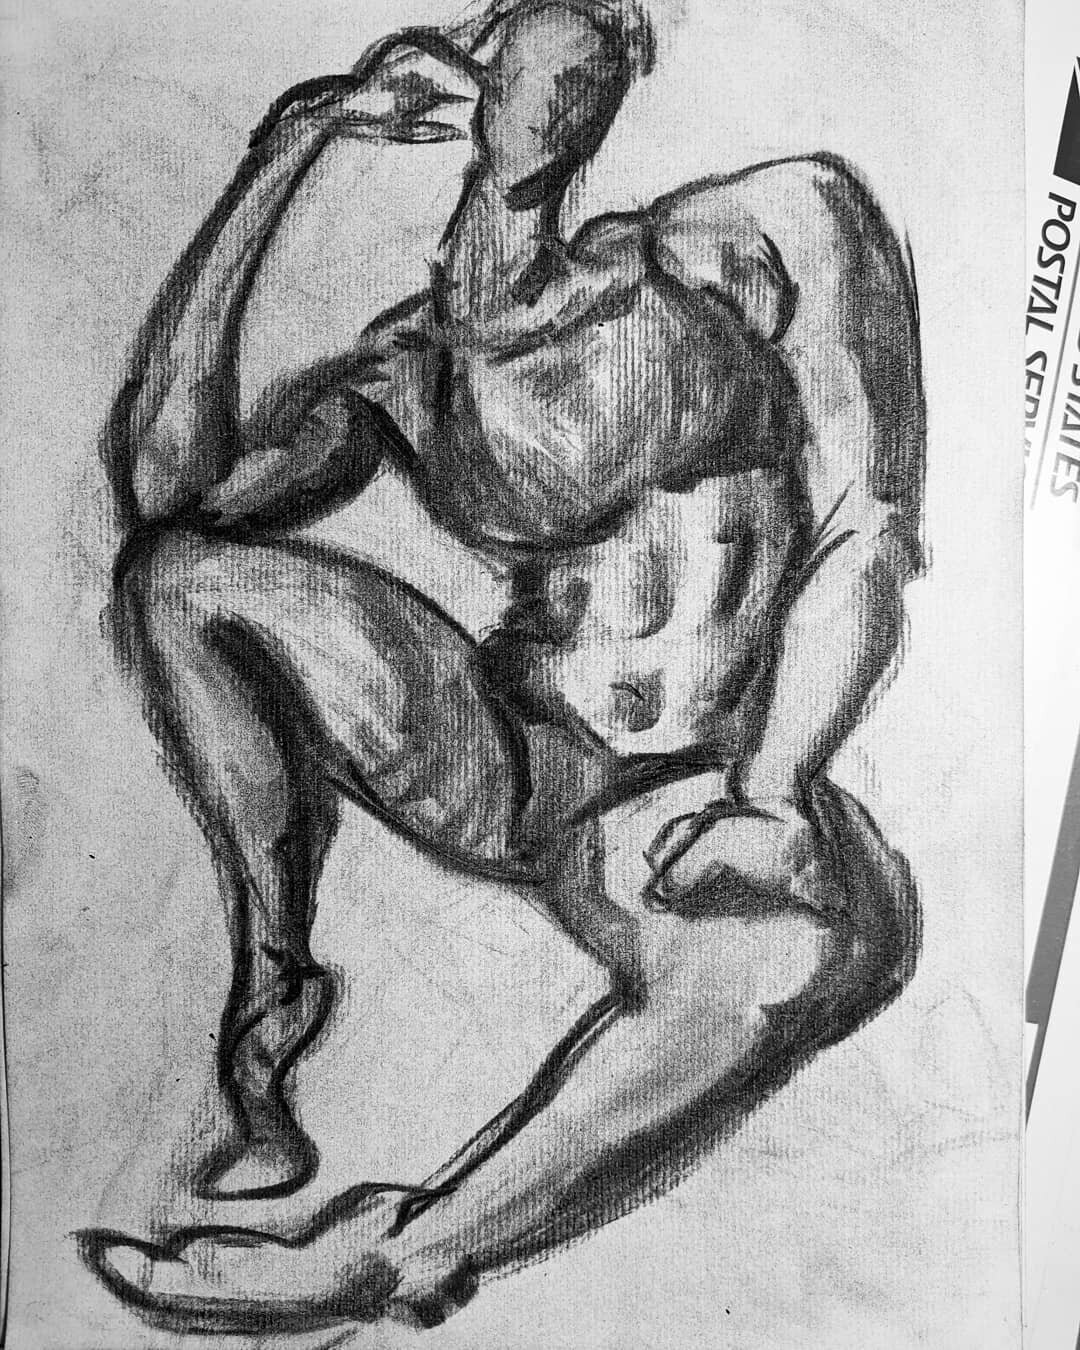 swish swish shshwish that's the sound this drawing makes in my head
.
.
.
#charcoaldrawing #figuredrawing #charcoalart #charcoalfiguredrawing #figuredrawings #drawingnoises #gesturedrawing #gesture #gesturesketch #figuresketch #figuresketching #figur